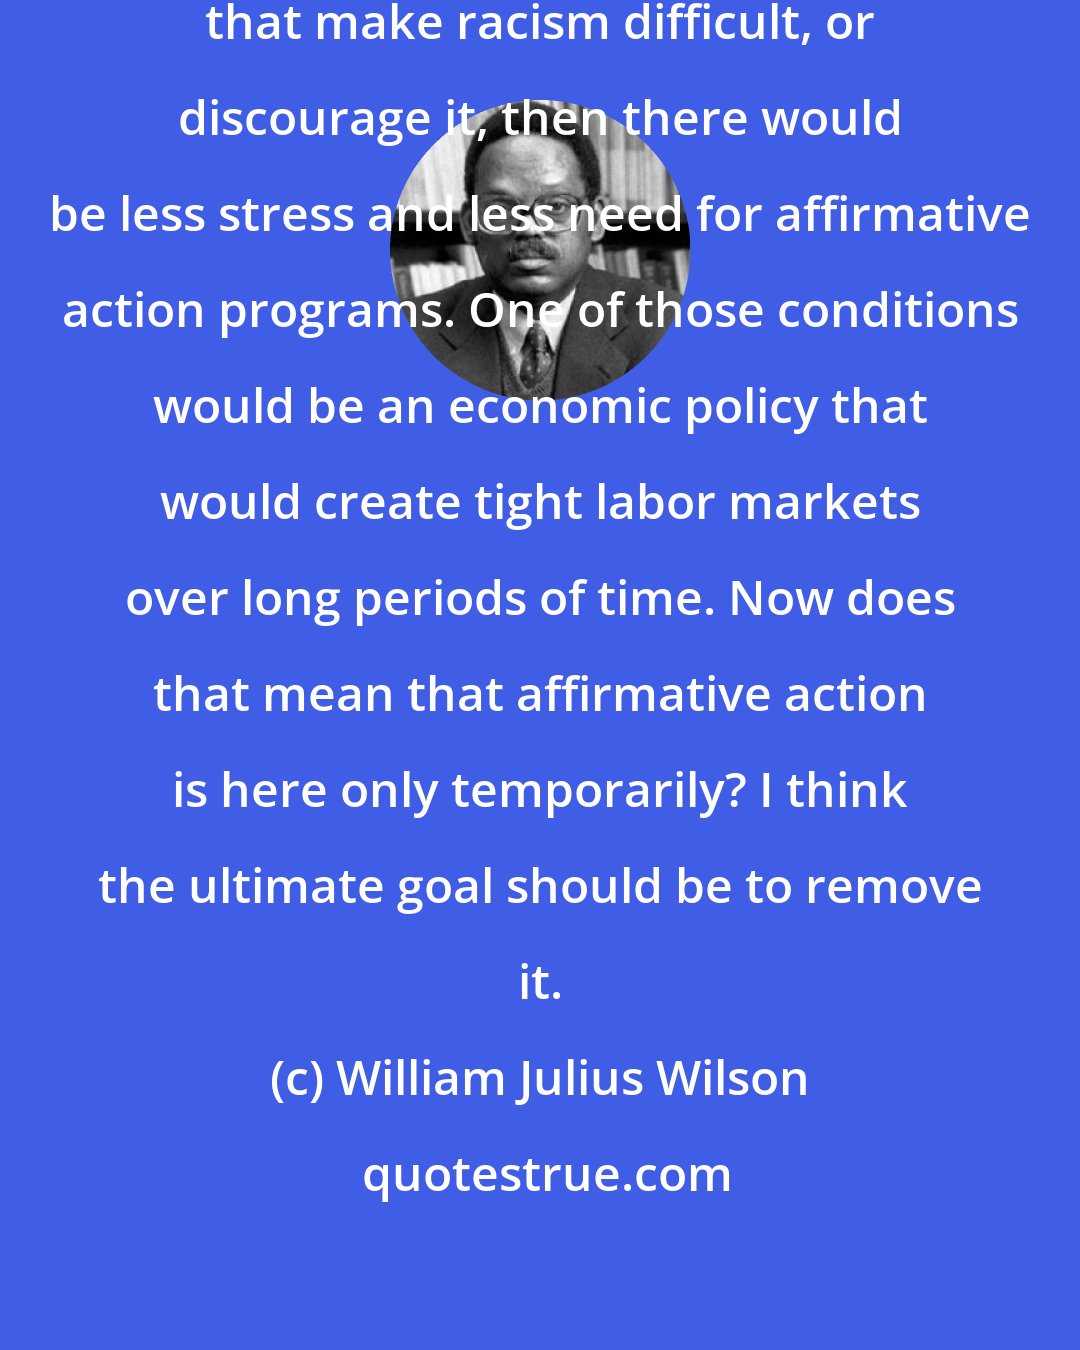 William Julius Wilson: If we could create the conditions that make racism difficult, or discourage it, then there would be less stress and less need for affirmative action programs. One of those conditions would be an economic policy that would create tight labor markets over long periods of time. Now does that mean that affirmative action is here only temporarily? I think the ultimate goal should be to remove it.